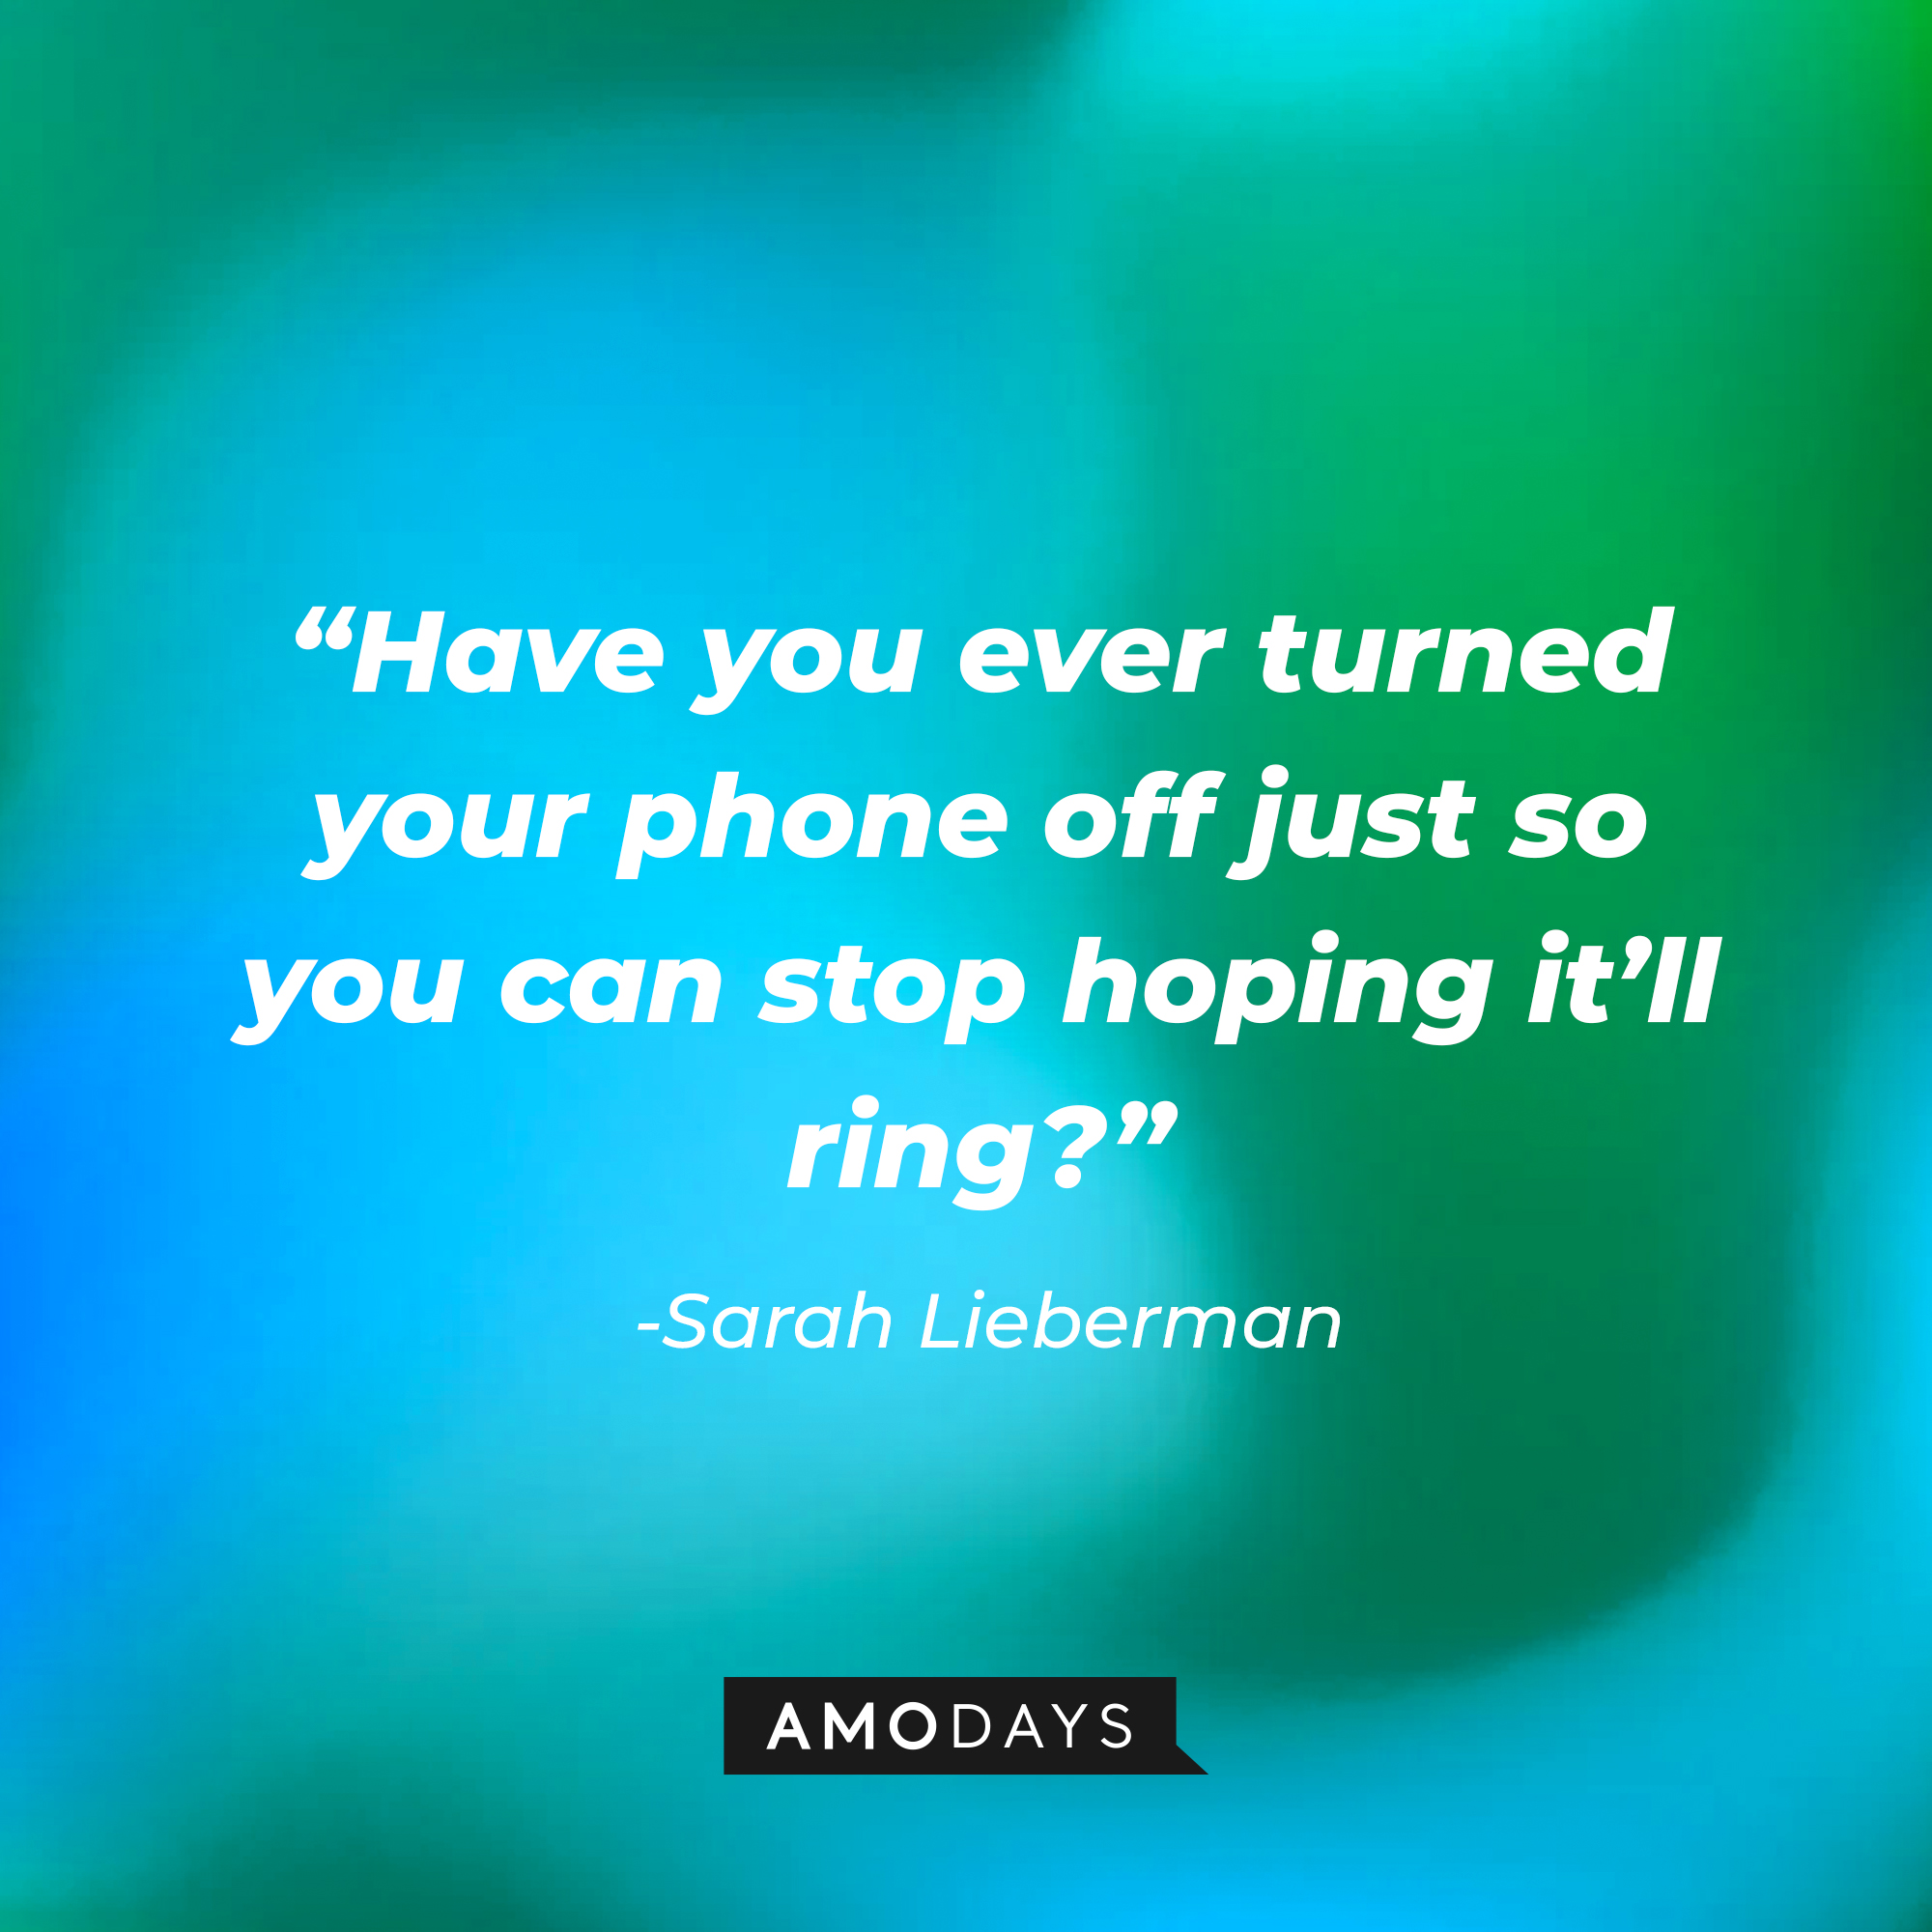 Sarah Lieberman’s quote: “Have you ever turned your phone off just so you can stop hoping it’ll ring?” | Source: AmoDays